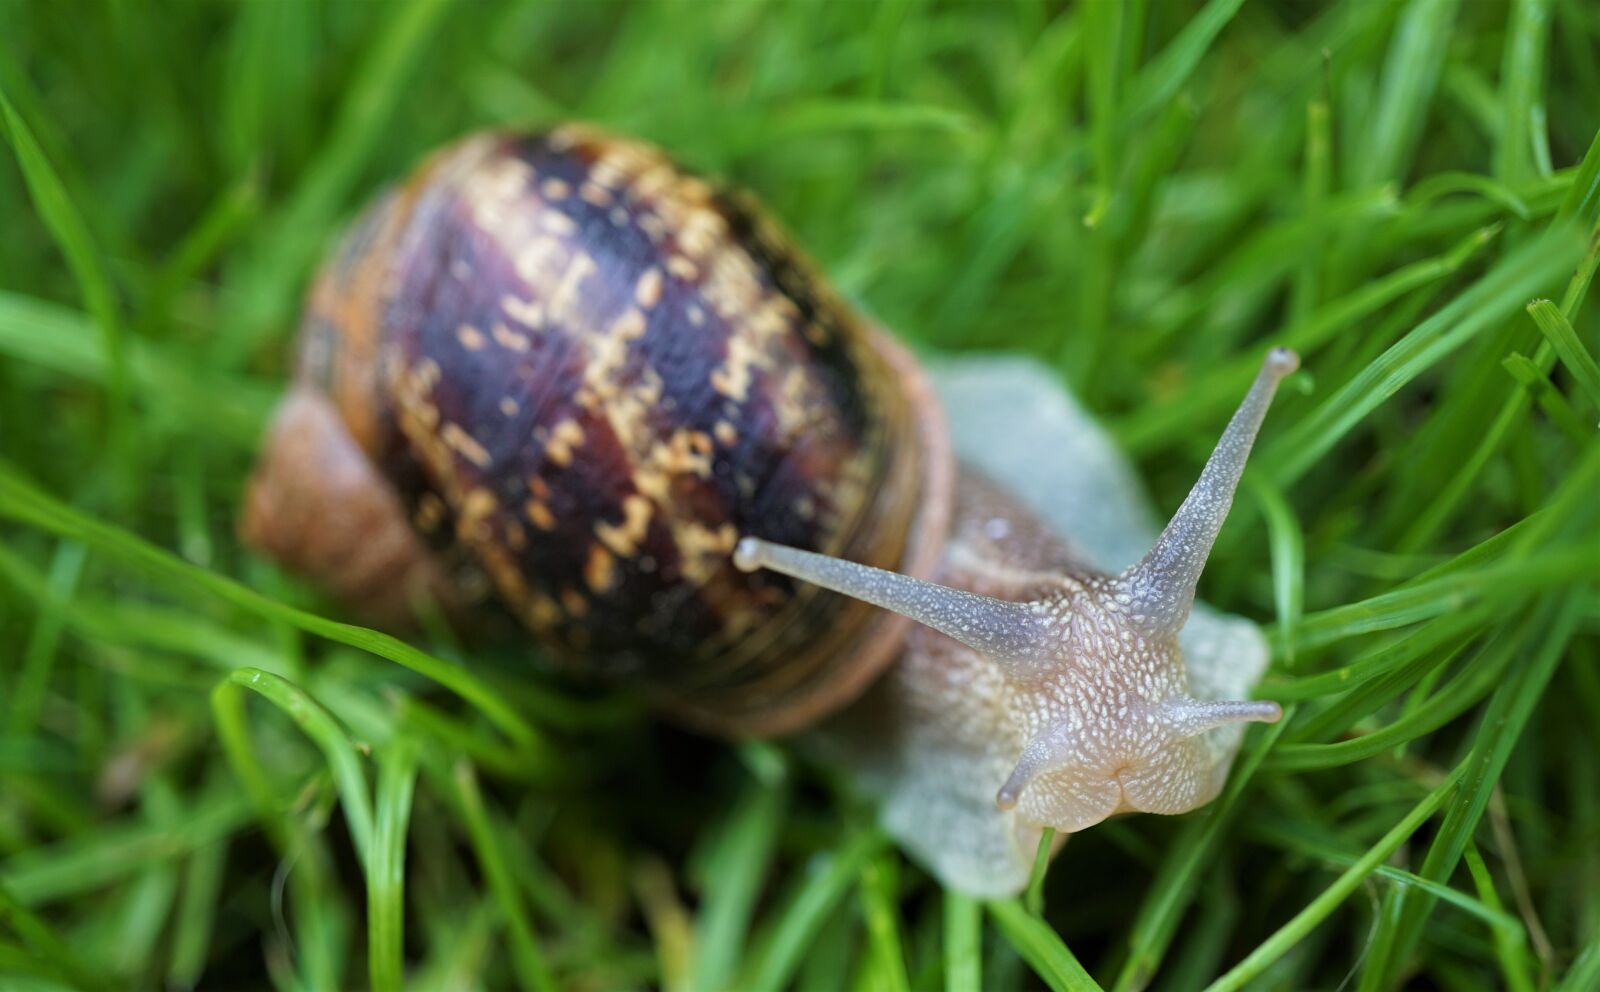 Sony a6000 sample photo. Snail, reptile, shell photography